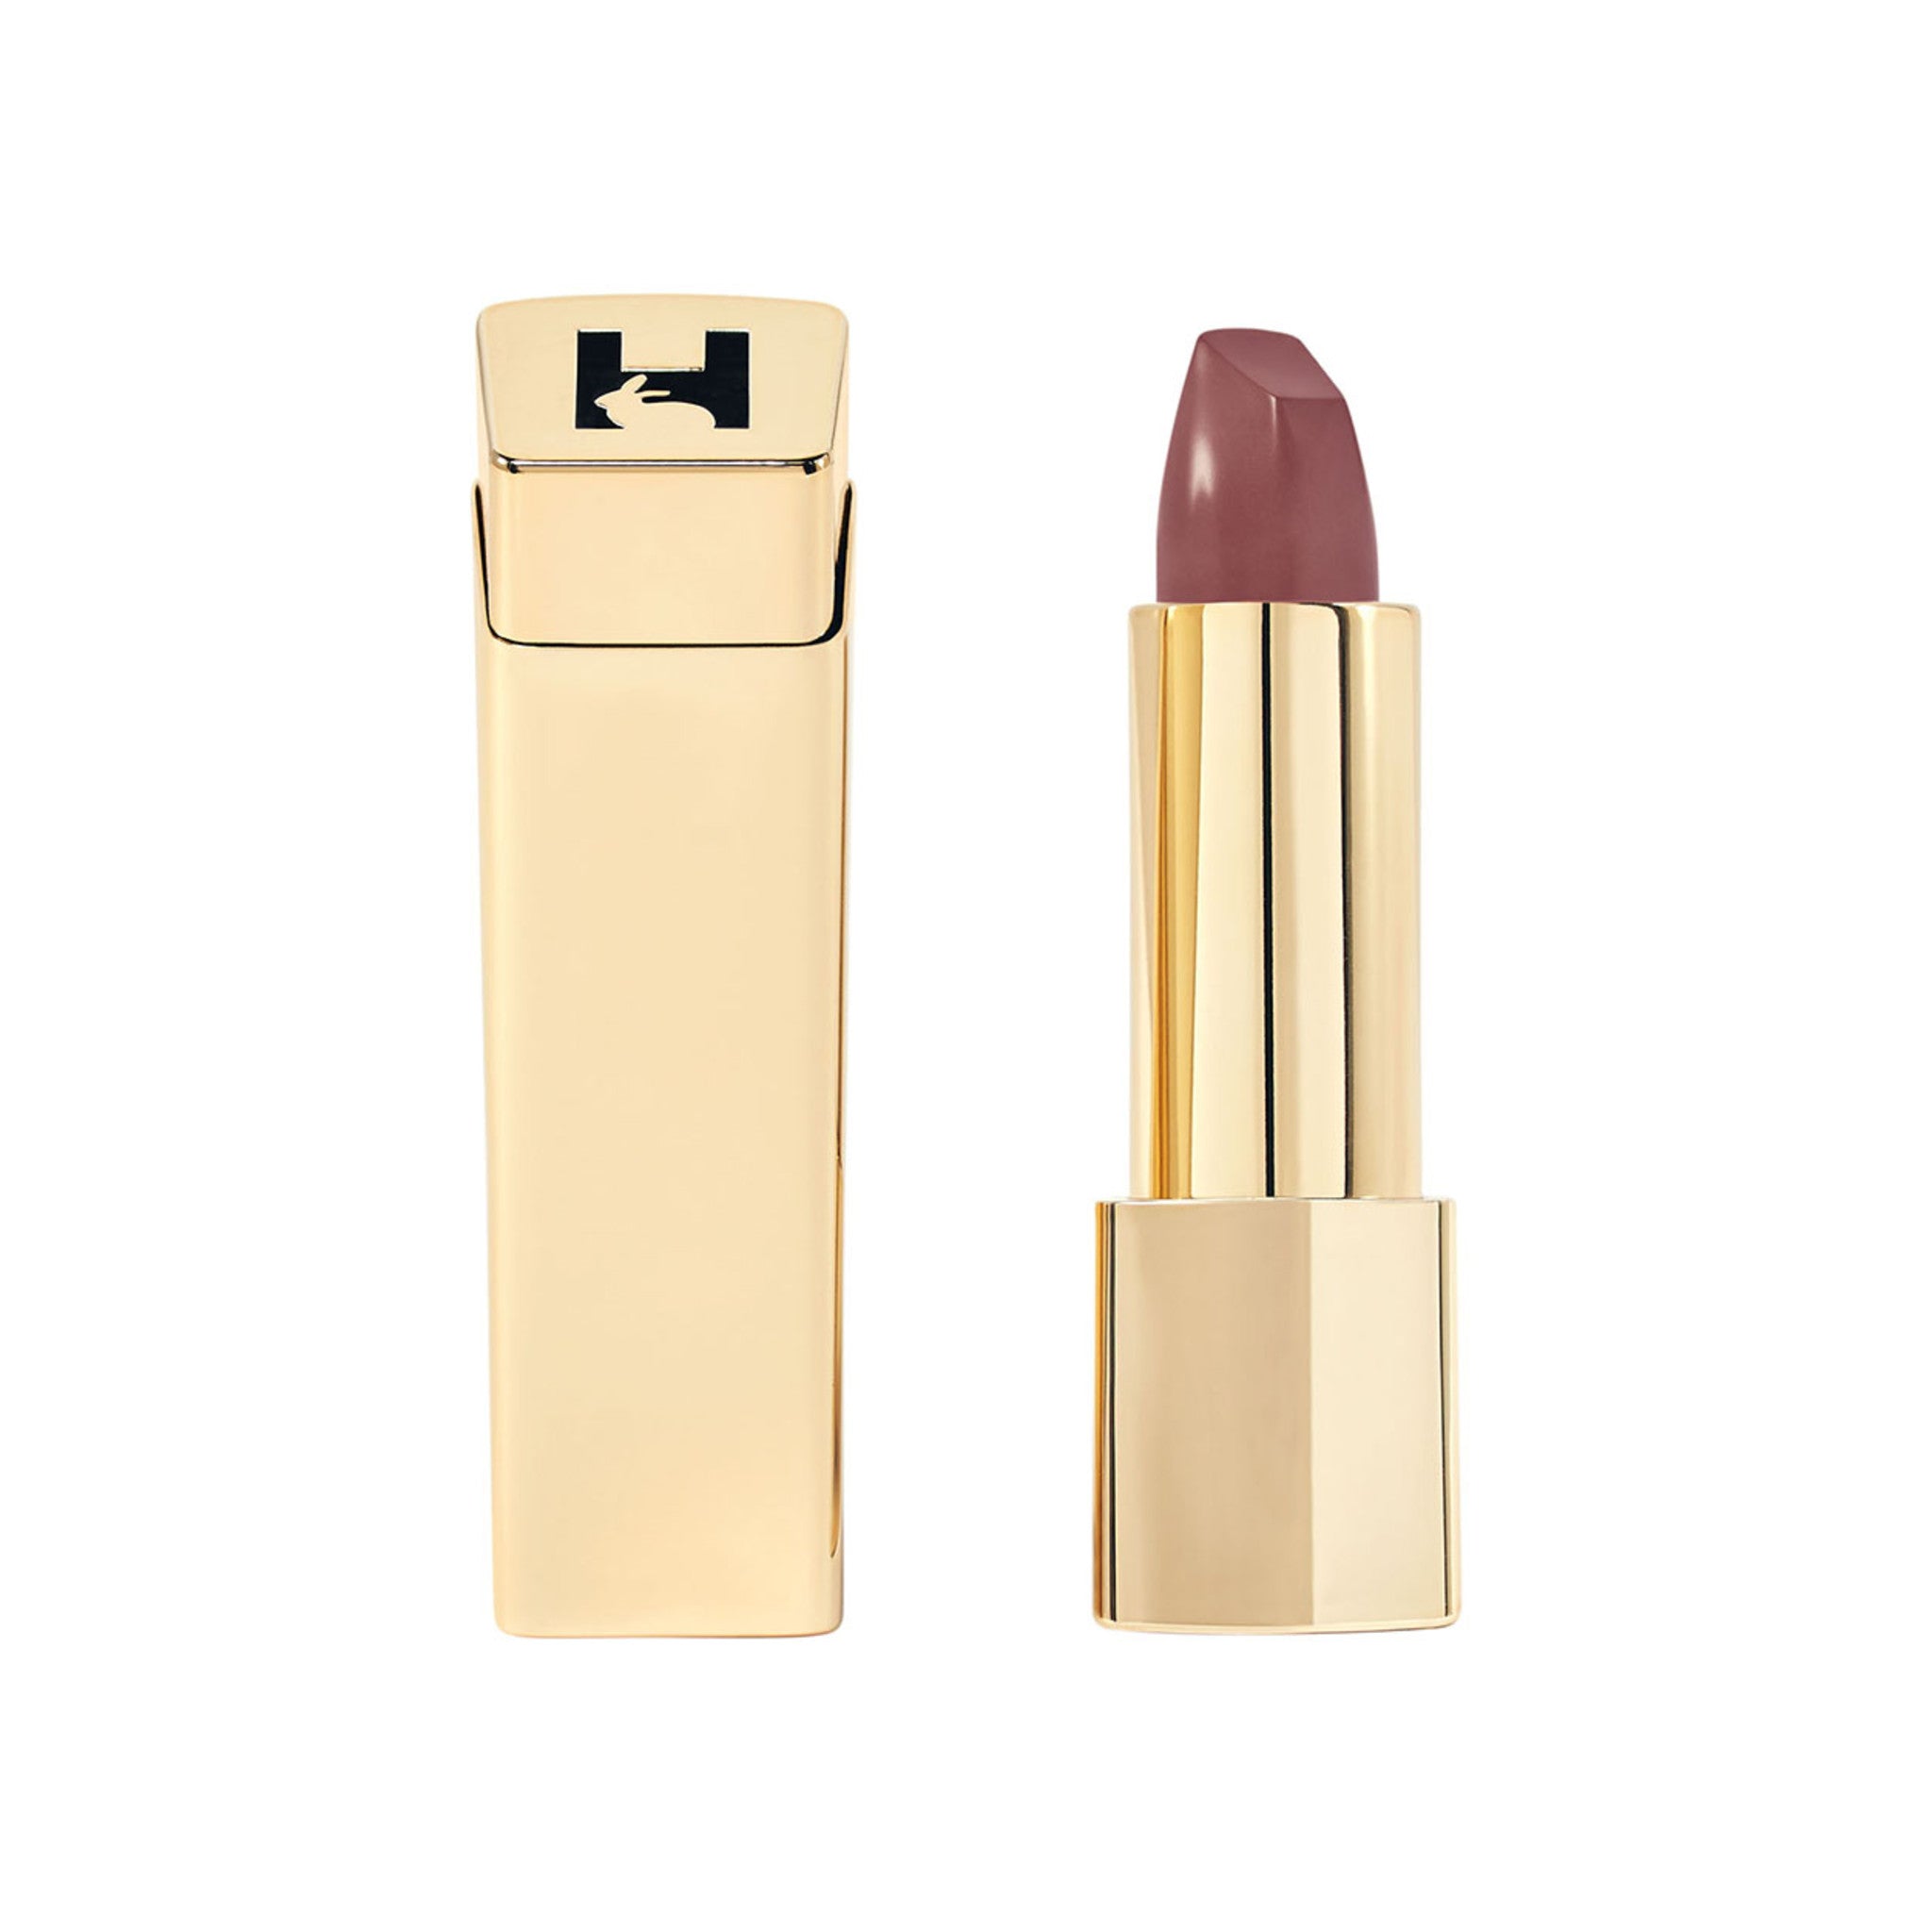 Hourglass Unlocked Satin Crème Lipstick Color/Shade variant: Cypress 328 main image.